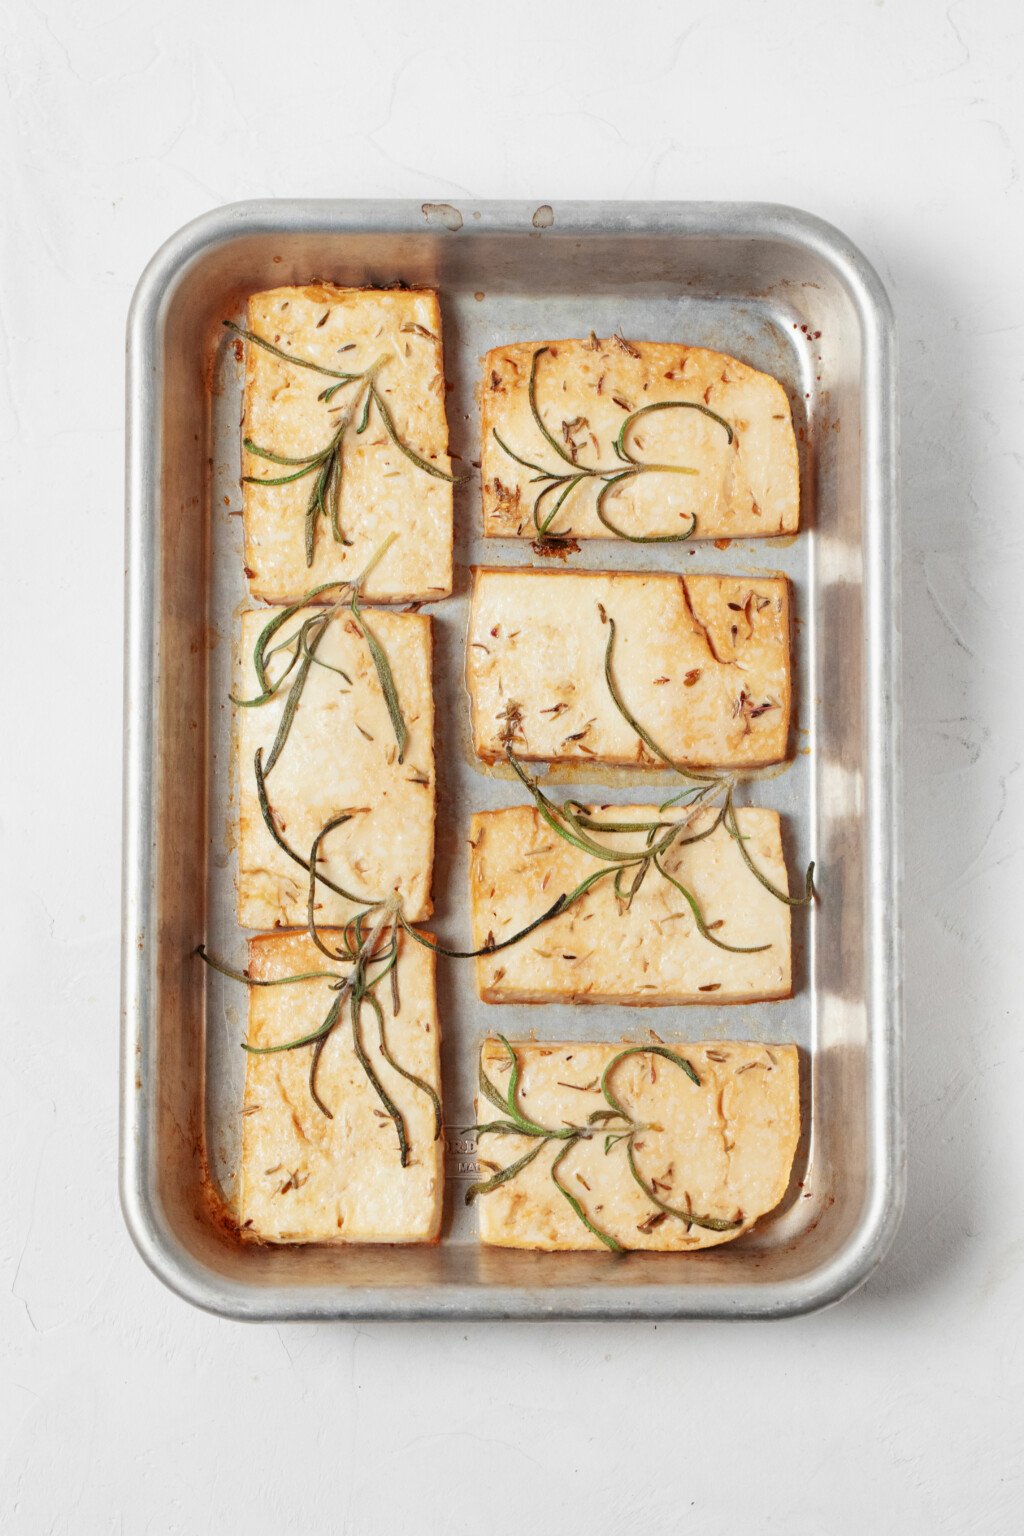 An overhead image of baked tofu slices, covered with long, thin pieces of fresh rosemary.